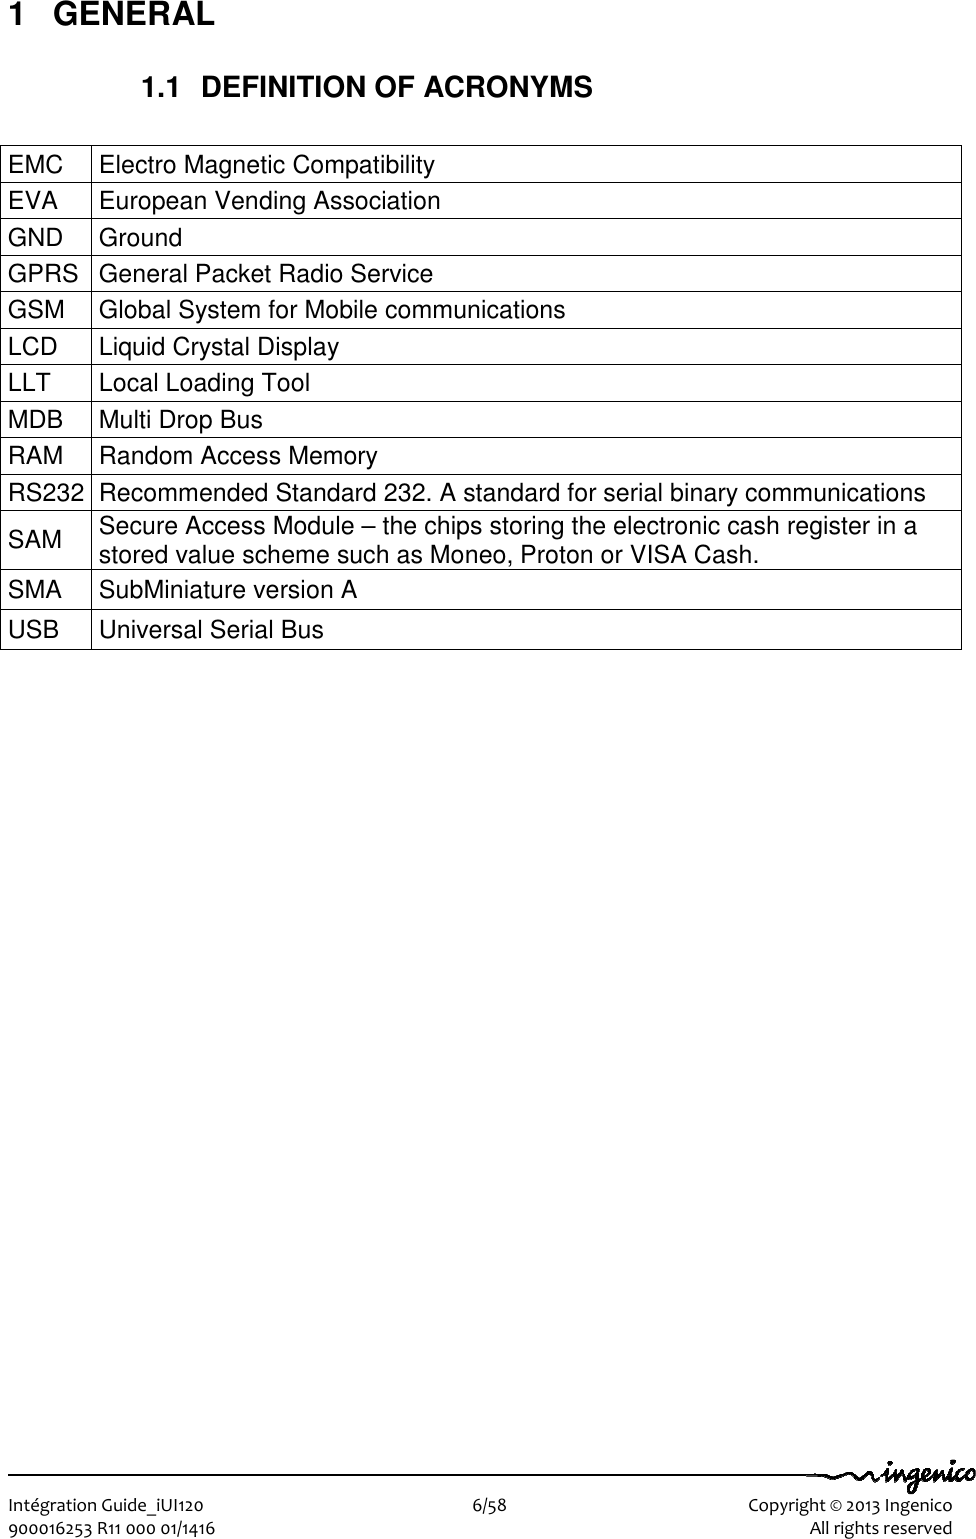   Intégration Guide_iUI120                        6/58    Copyright © 2013 Ingenico 900016253 R11 000 01/1416    All rights reserved 1  GENERAL 1.1  DEFINITION OF ACRONYMS  EMC  Electro Magnetic Compatibility EVA  European Vending Association GND  Ground GPRS General Packet Radio Service GSM  Global System for Mobile communications LCD  Liquid Crystal Display LLT  Local Loading Tool MDB  Multi Drop Bus RAM  Random Access Memory RS232 Recommended Standard 232. A standard for serial binary communications SAM  Secure Access Module – the chips storing the electronic cash register in a stored value scheme such as Moneo, Proton or VISA Cash. SMA  SubMiniature version A USB  Universal Serial Bus  